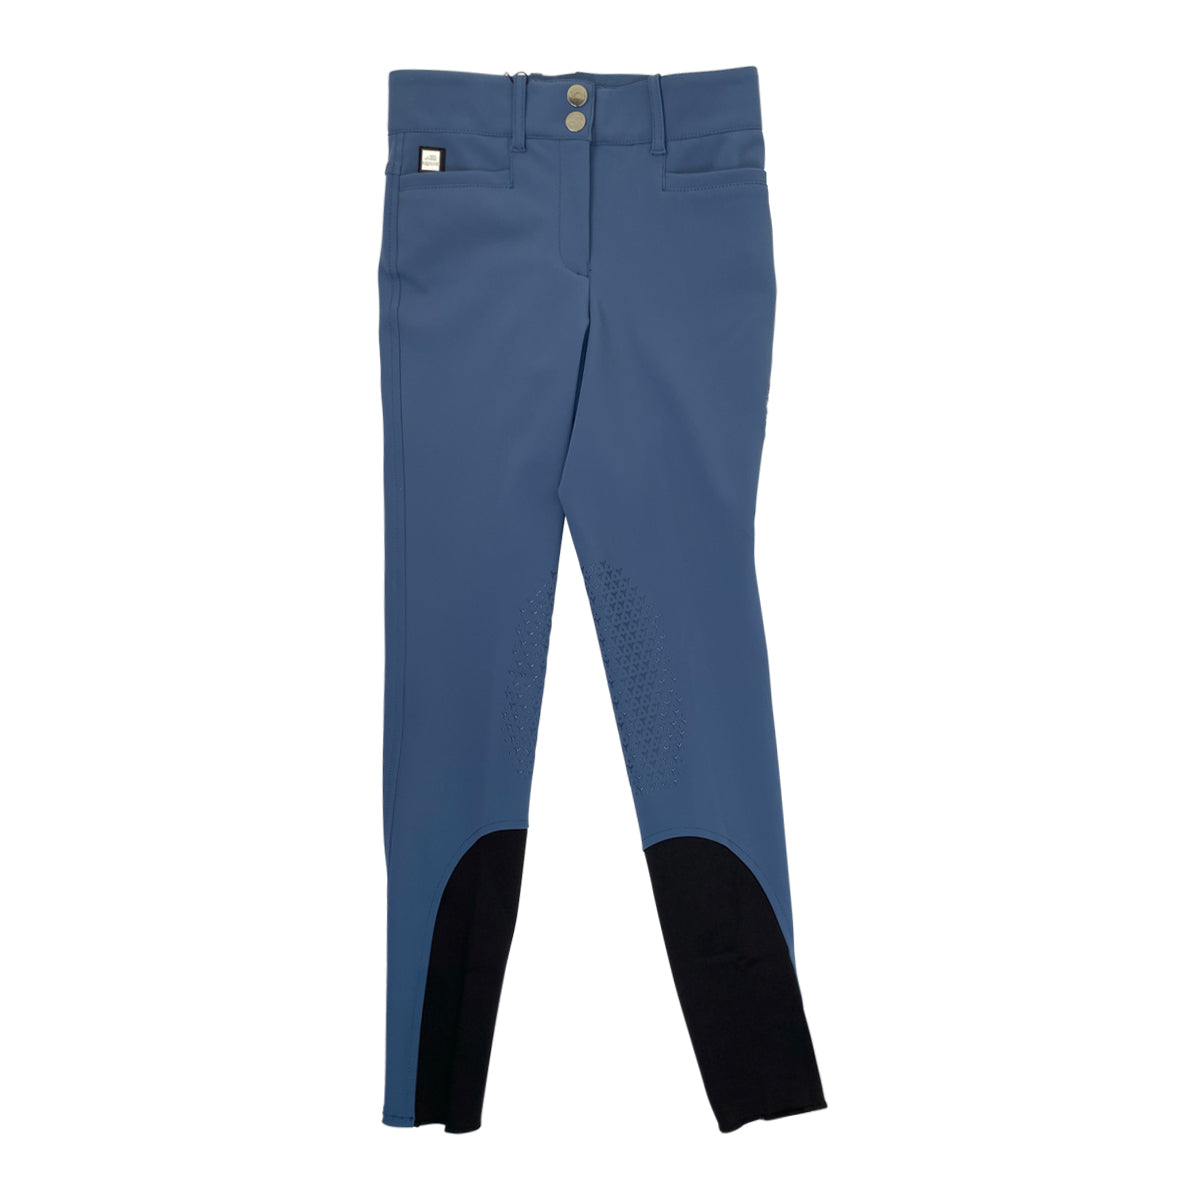 Equiline 'Ernaek' B-Move Breeches in Tempest